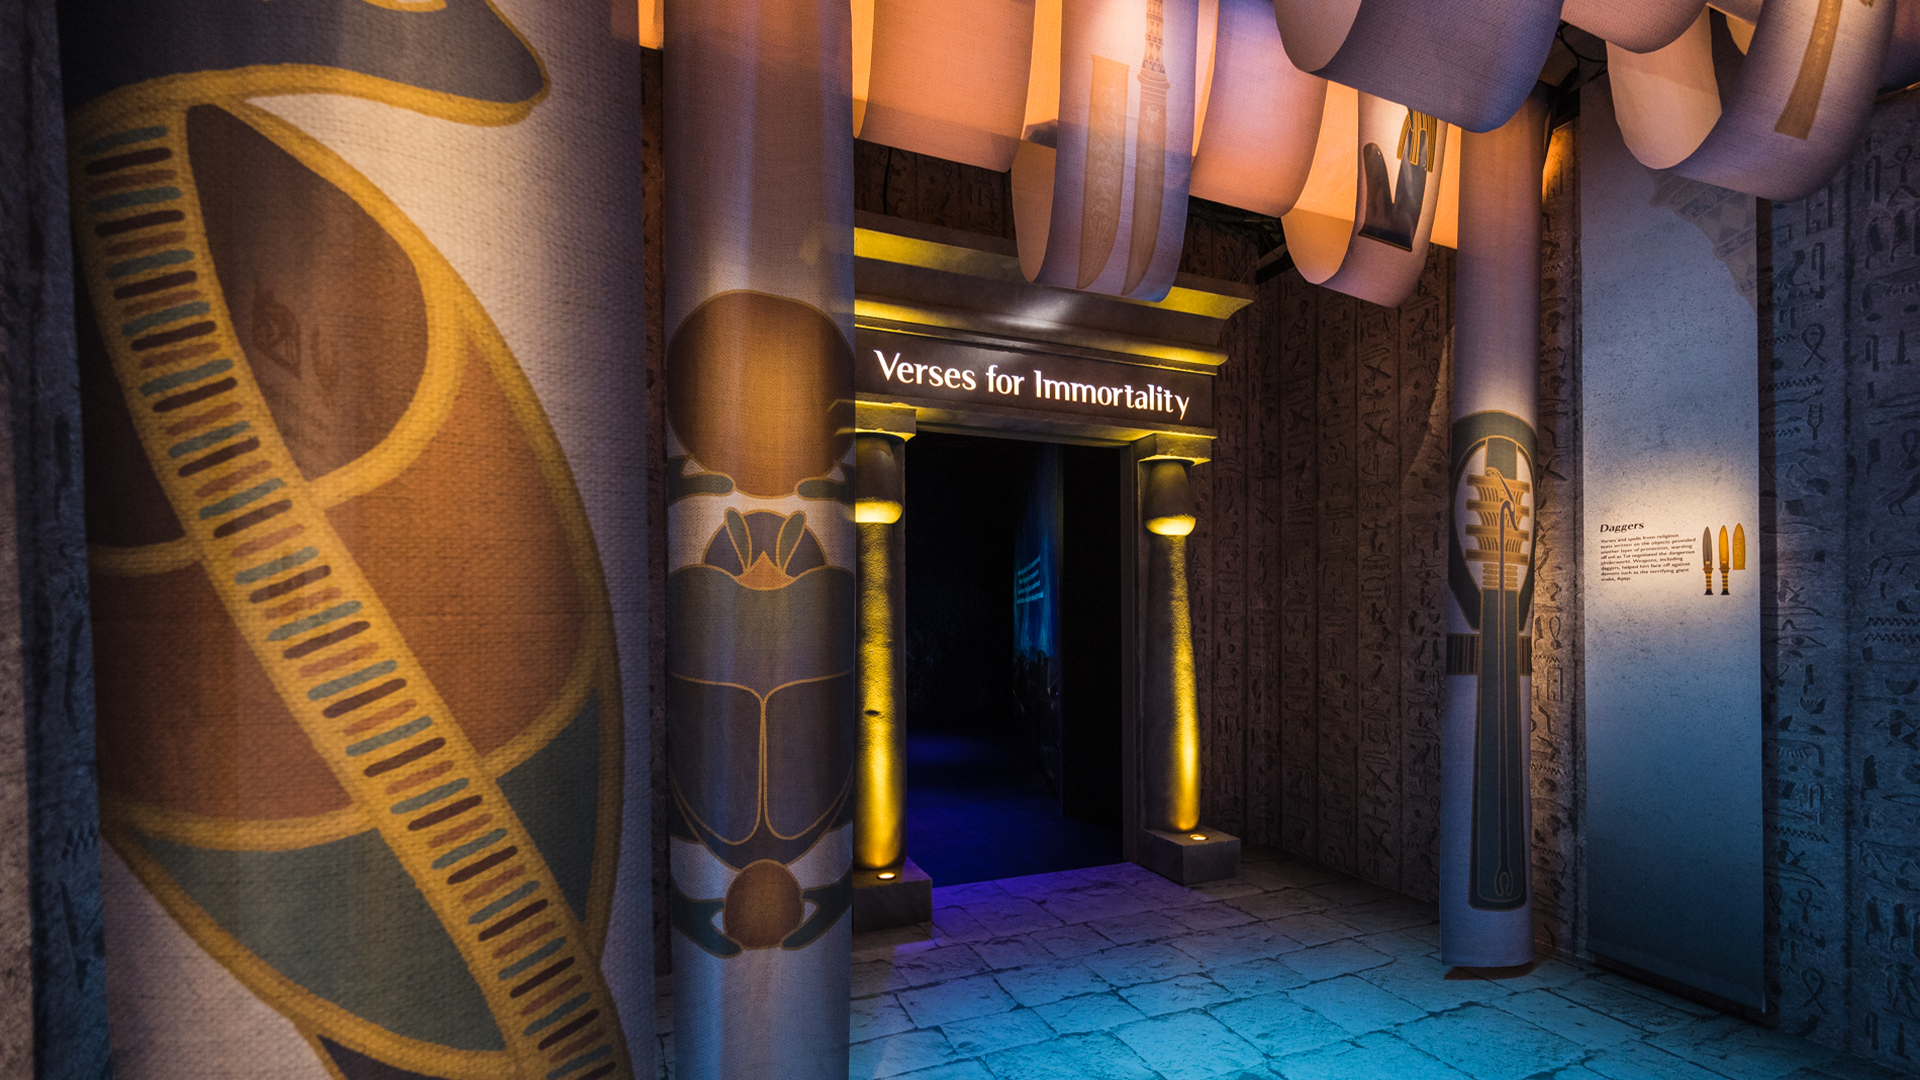 Entryway into Verses for Immortality - taking guests through an experience of the afterlife: Beyond King Tut